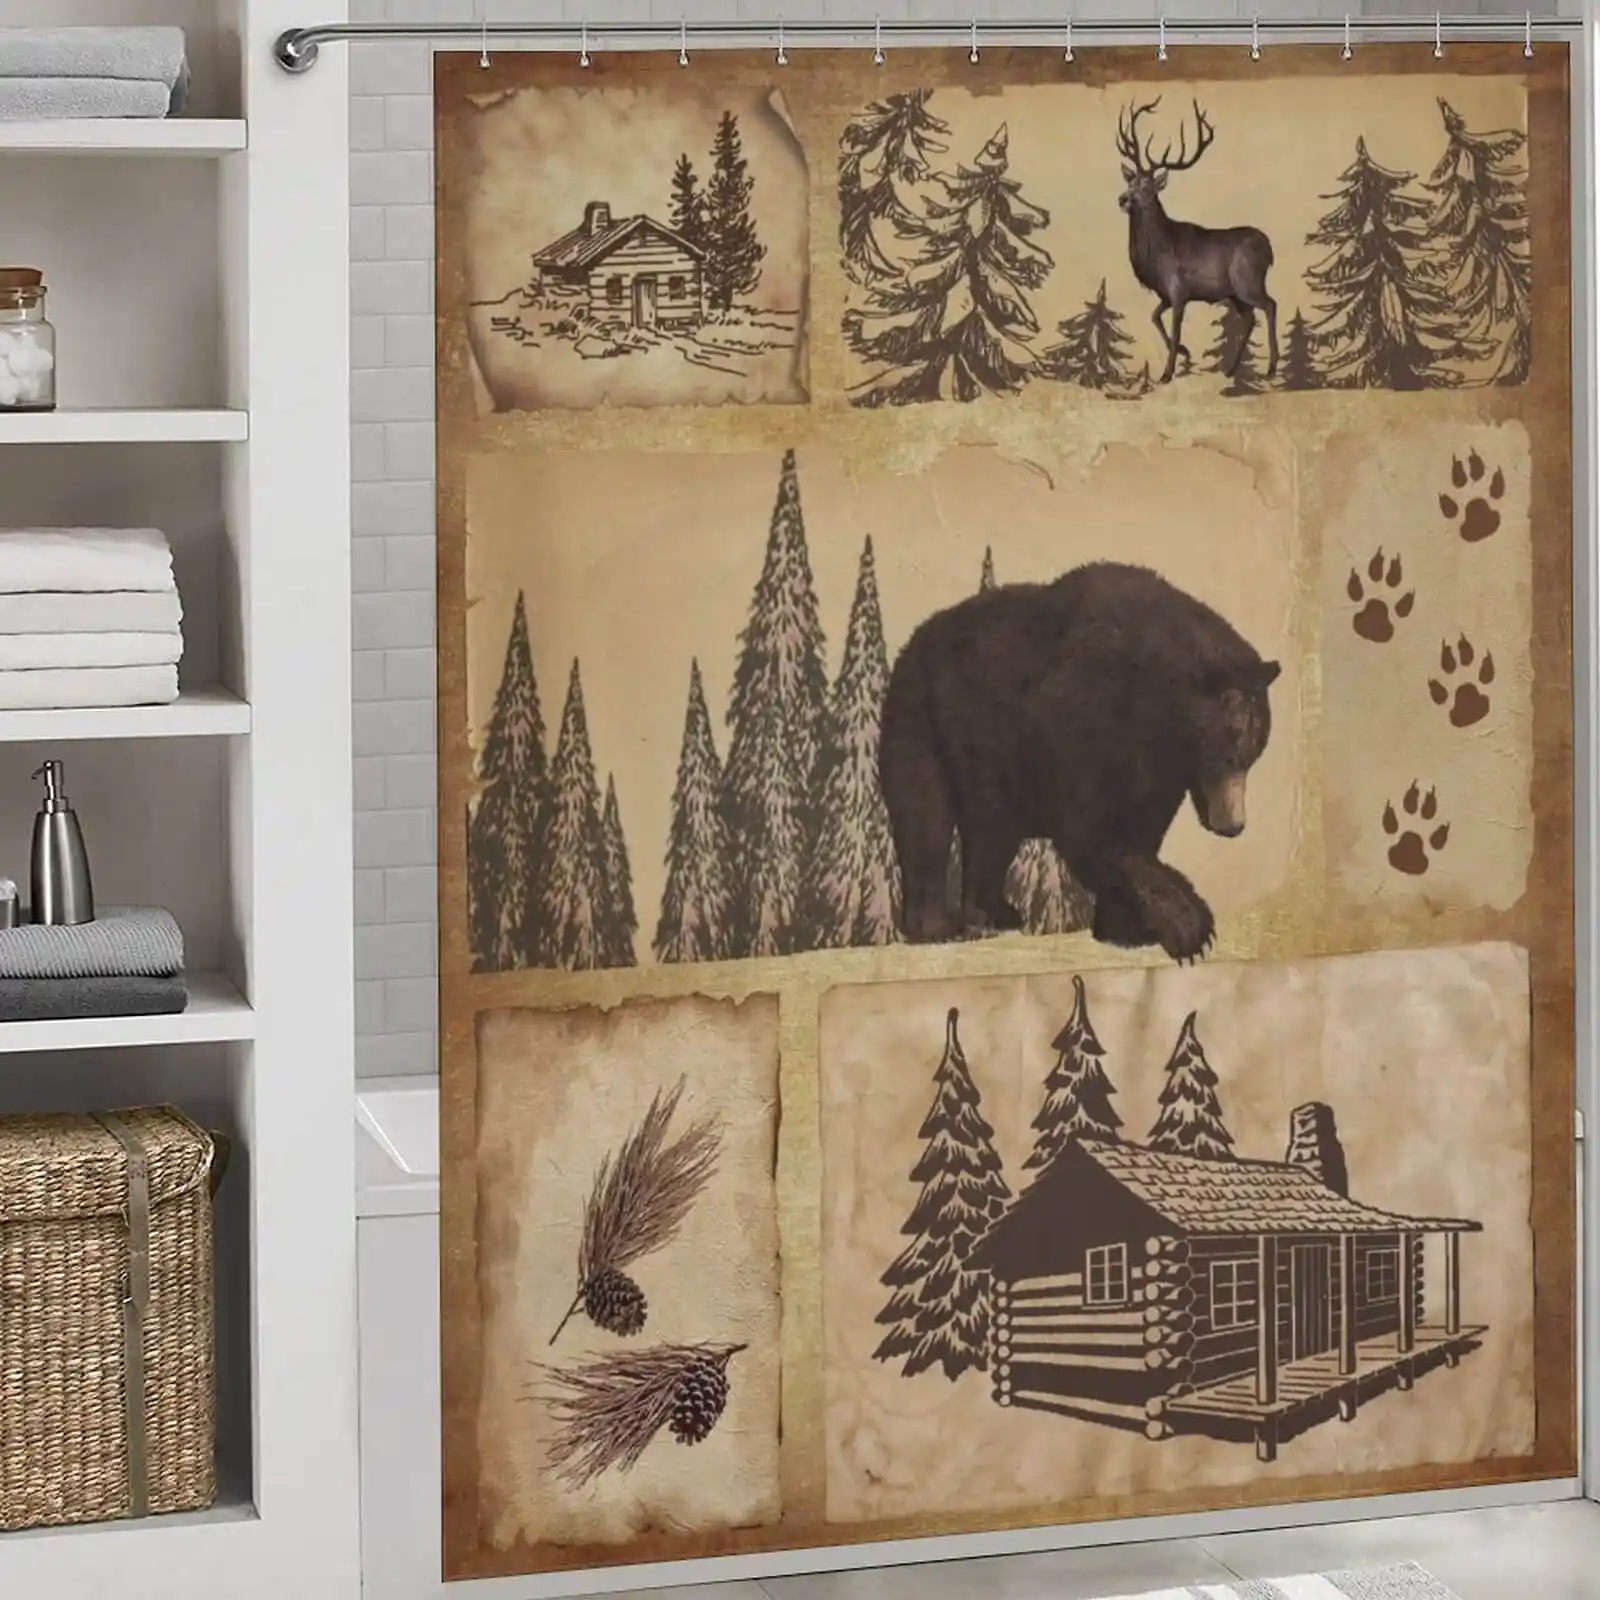 A rustic shower curtain featuring bears, moose, and a cabin - perfect for vintage bathroom decor.